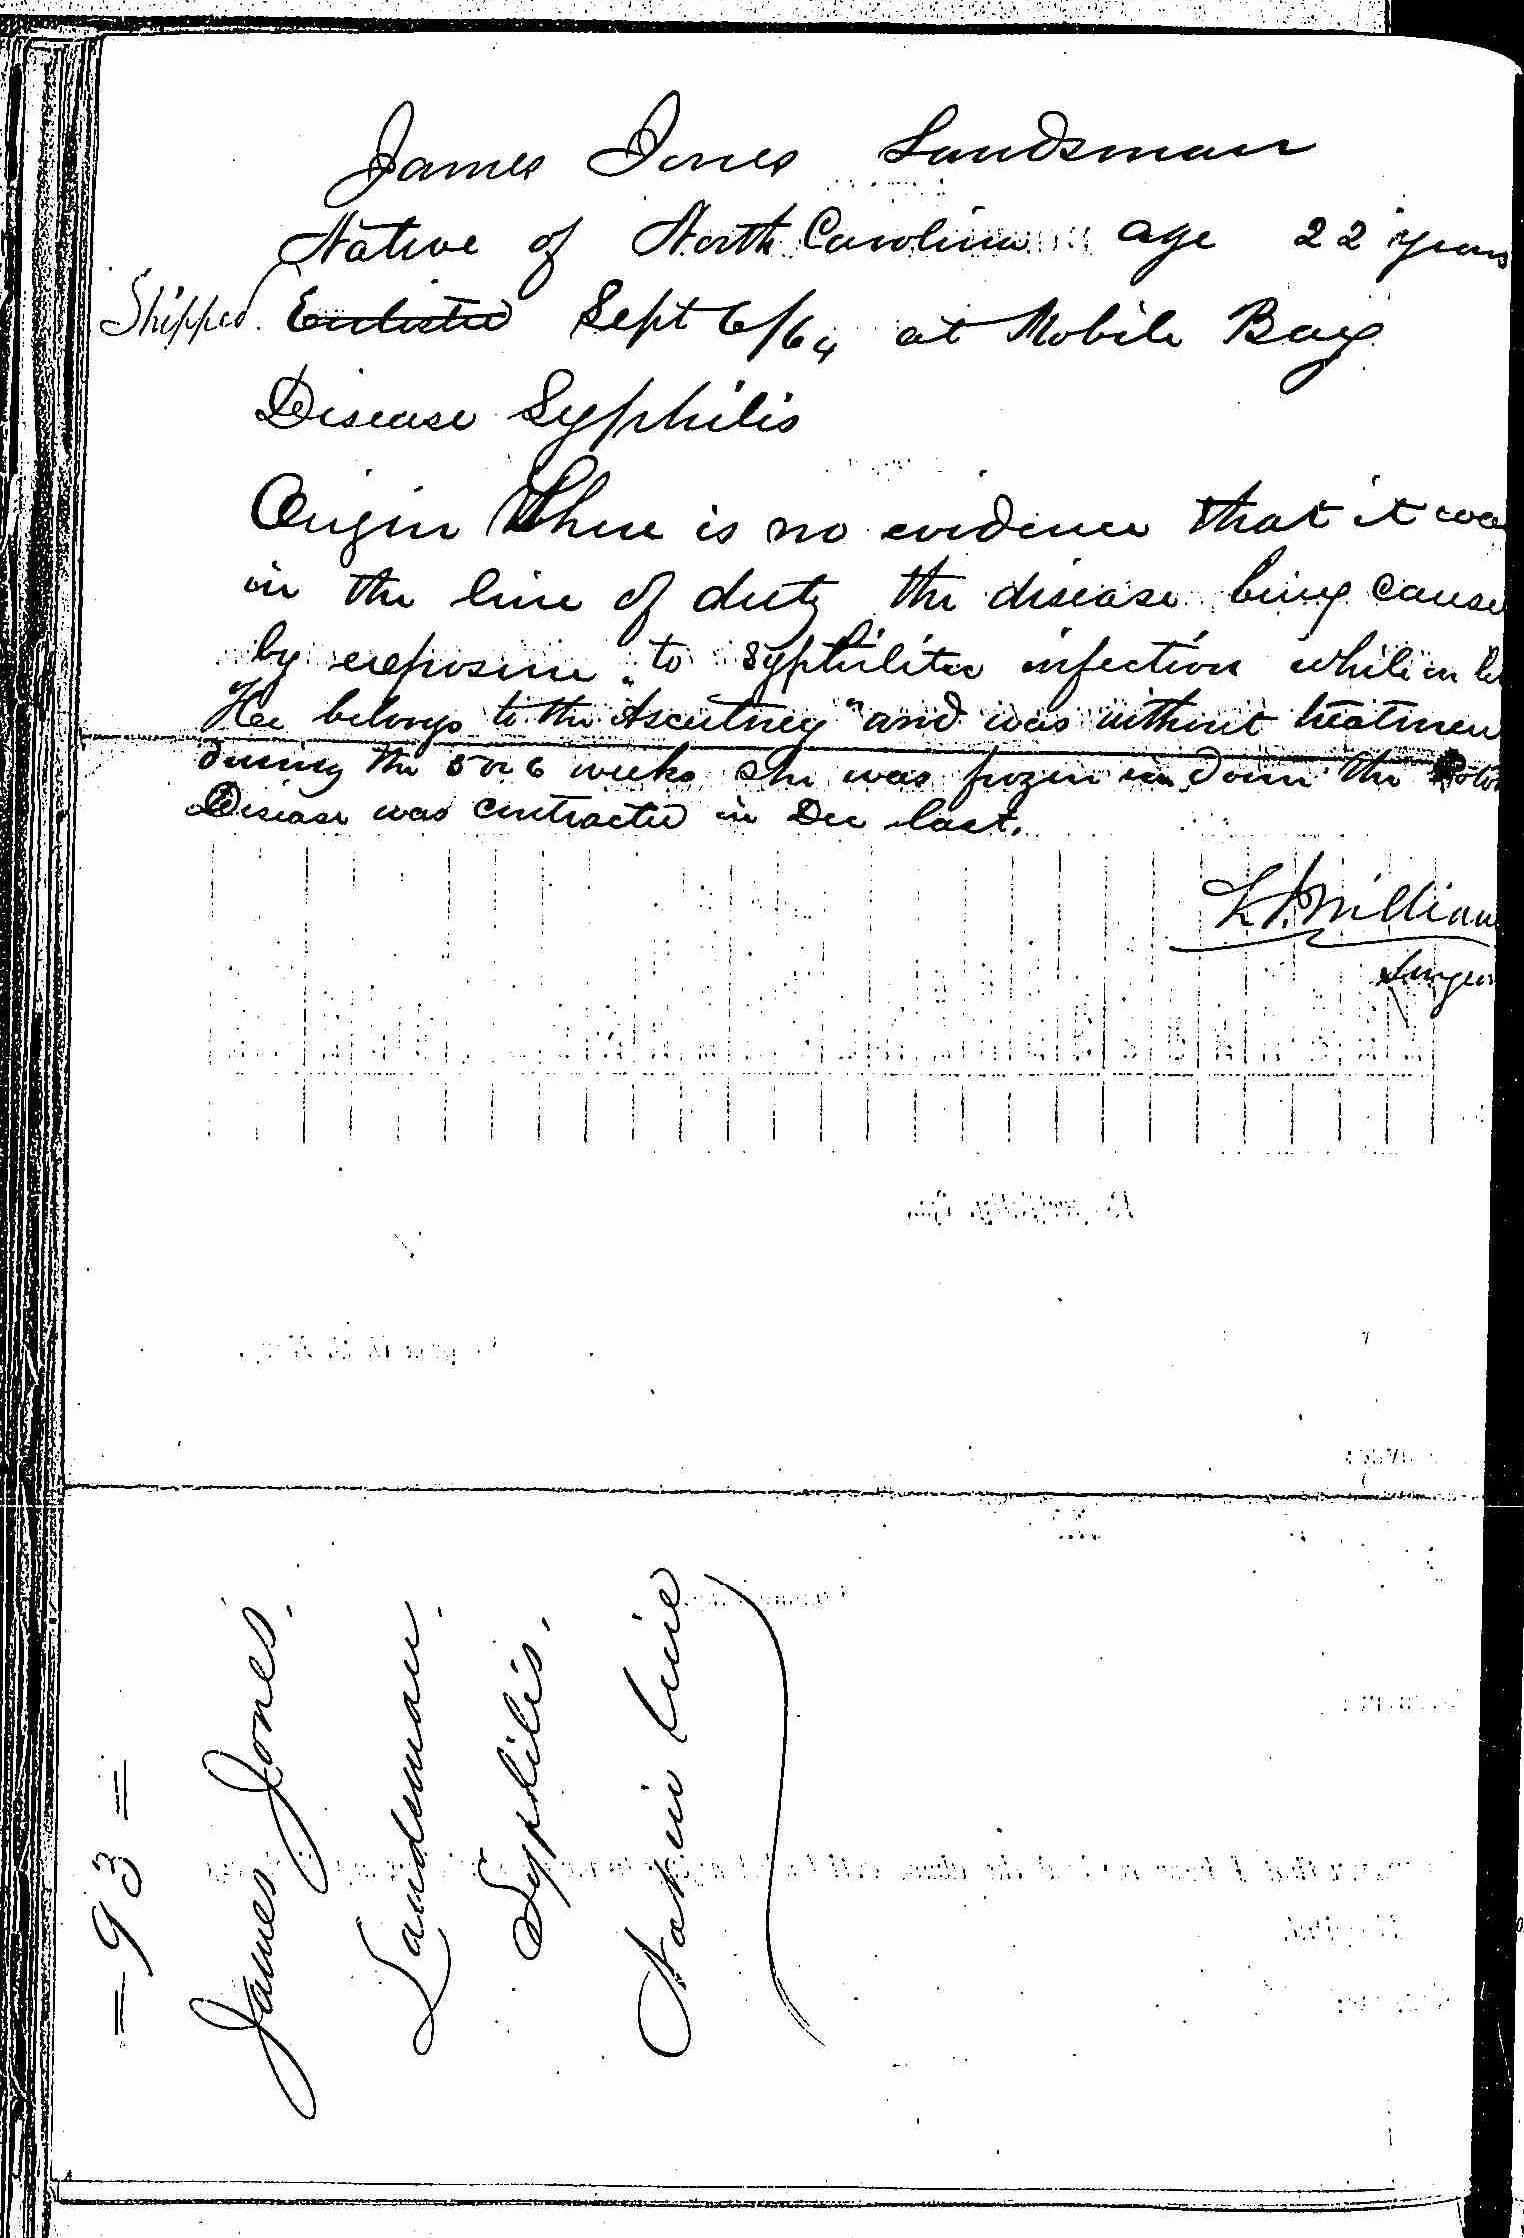 Entry for James Jones (page 2 of 2) in the log Hospital Tickets and Case Papers - Naval Hospital - Washington, D.C. - 1865-68